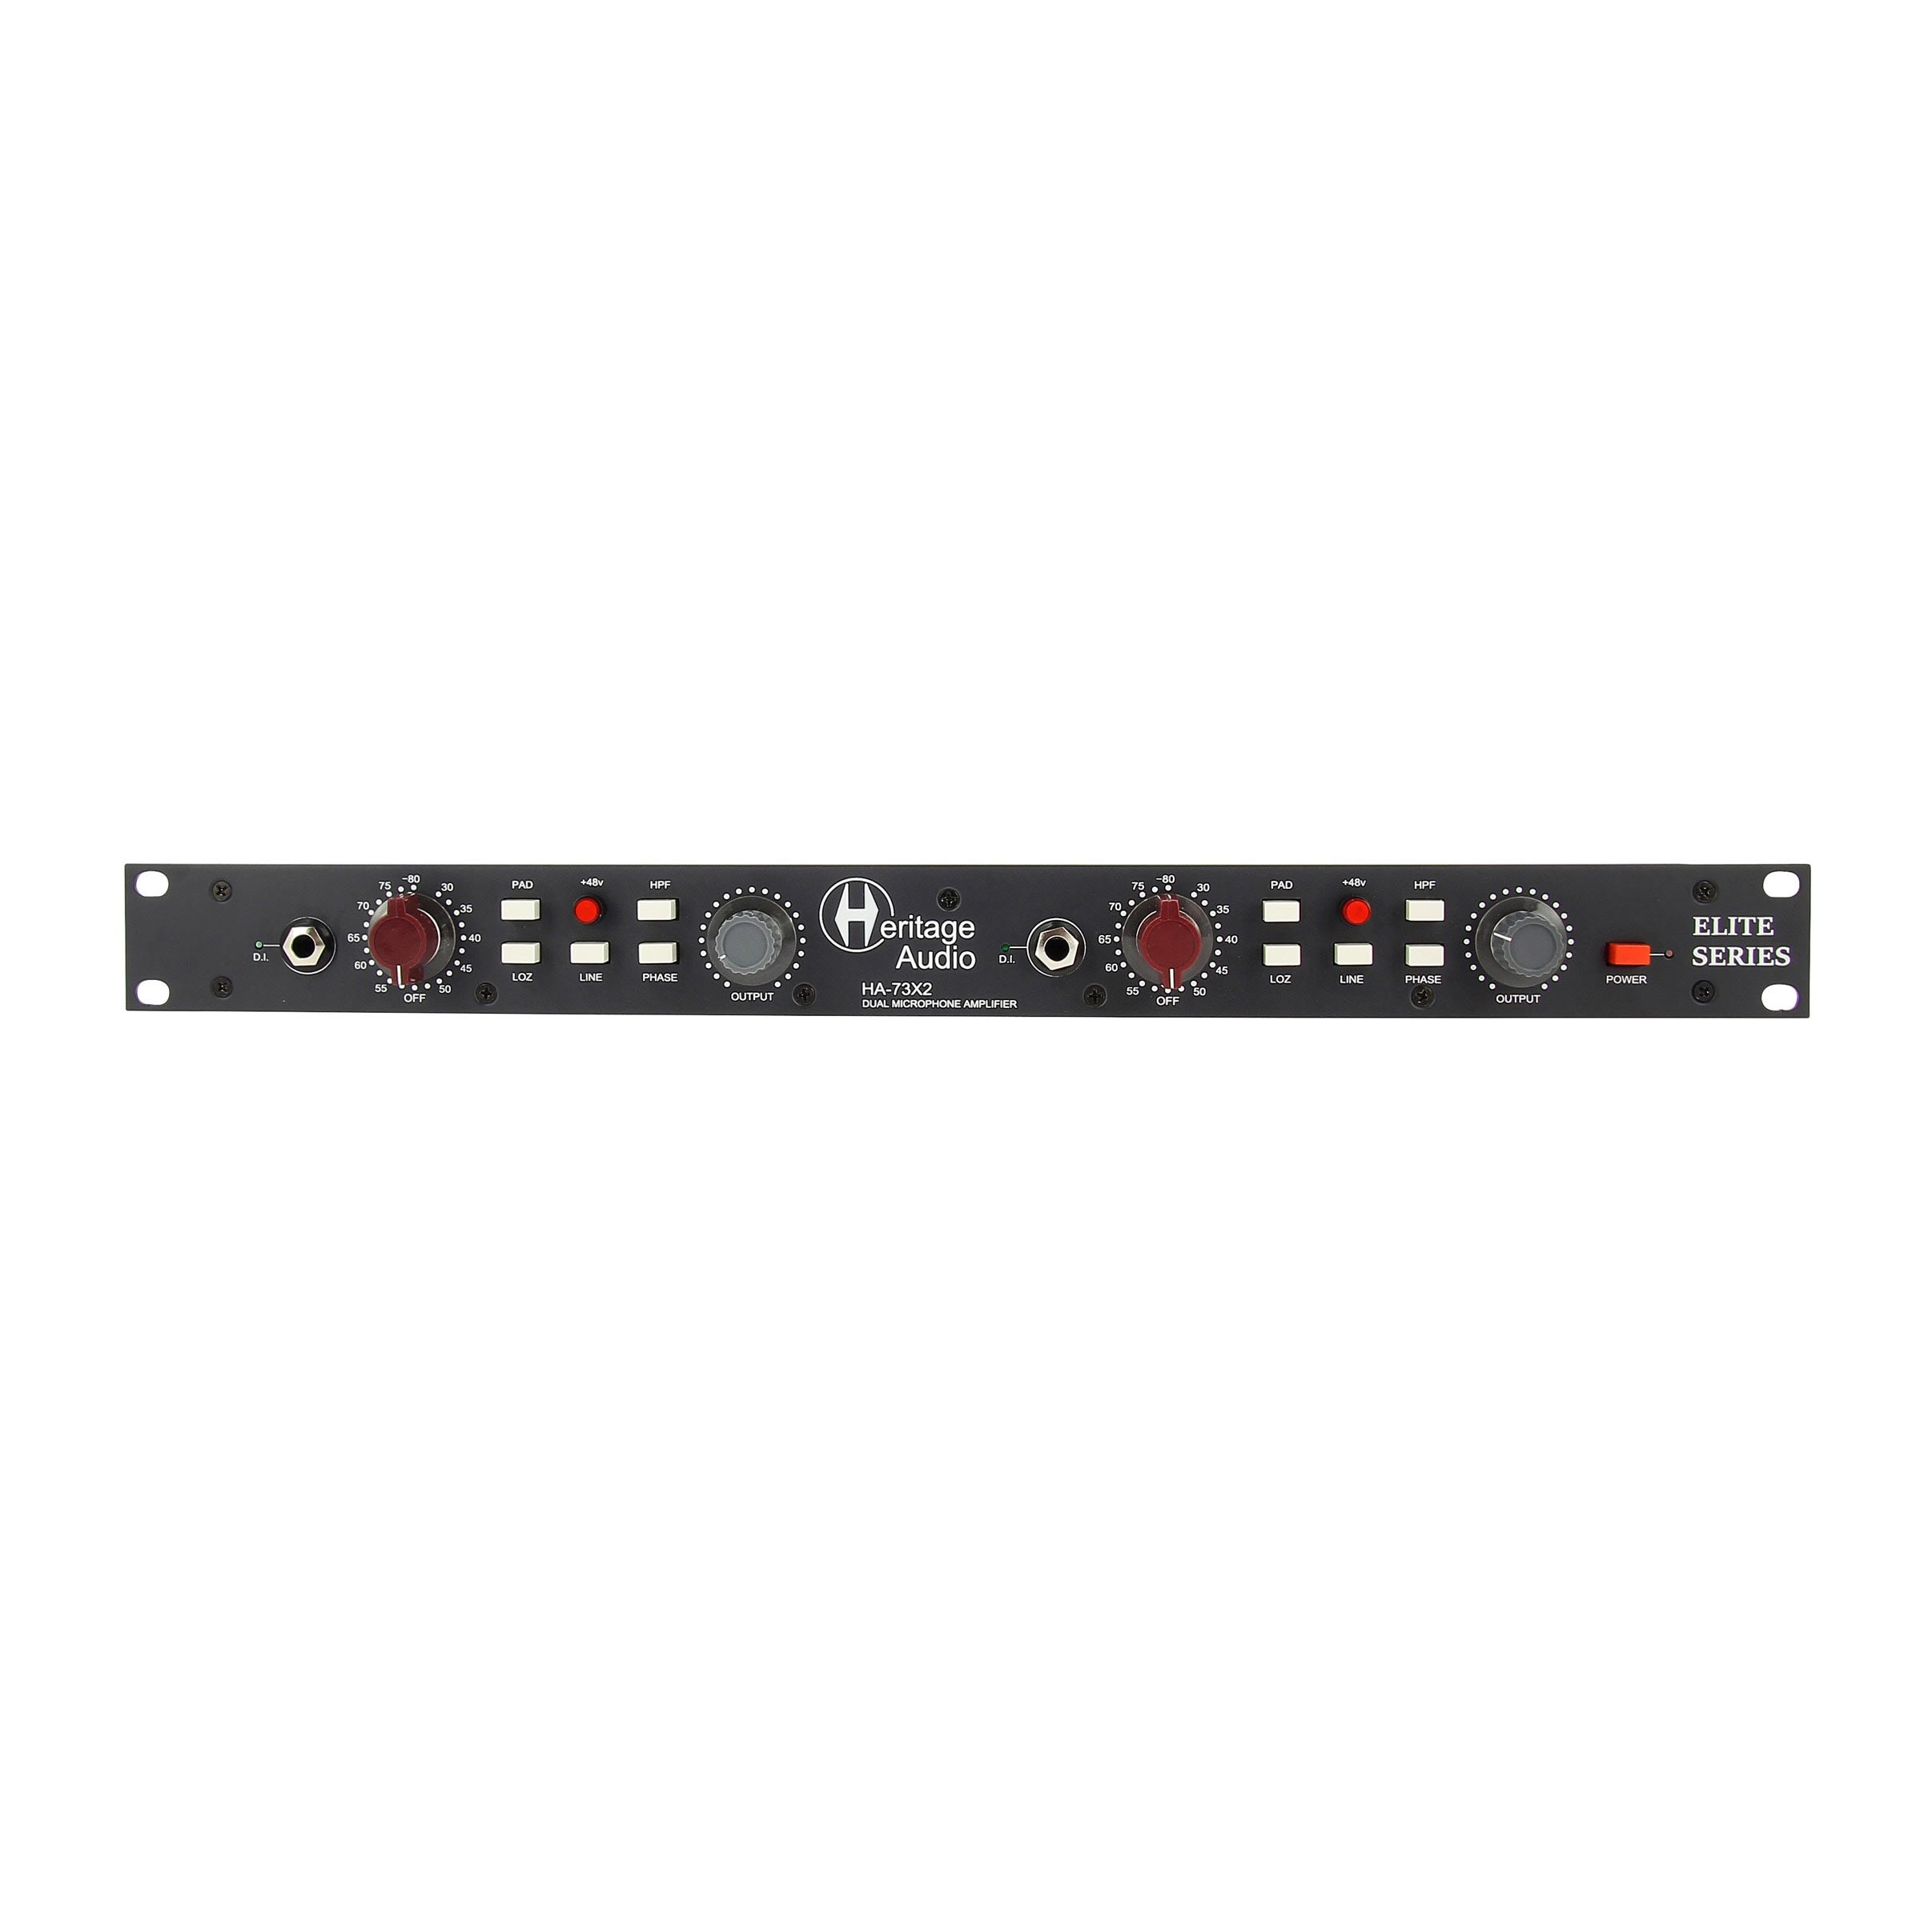 ge Audio BritStrip - Console Style Channel Strip - Professional 